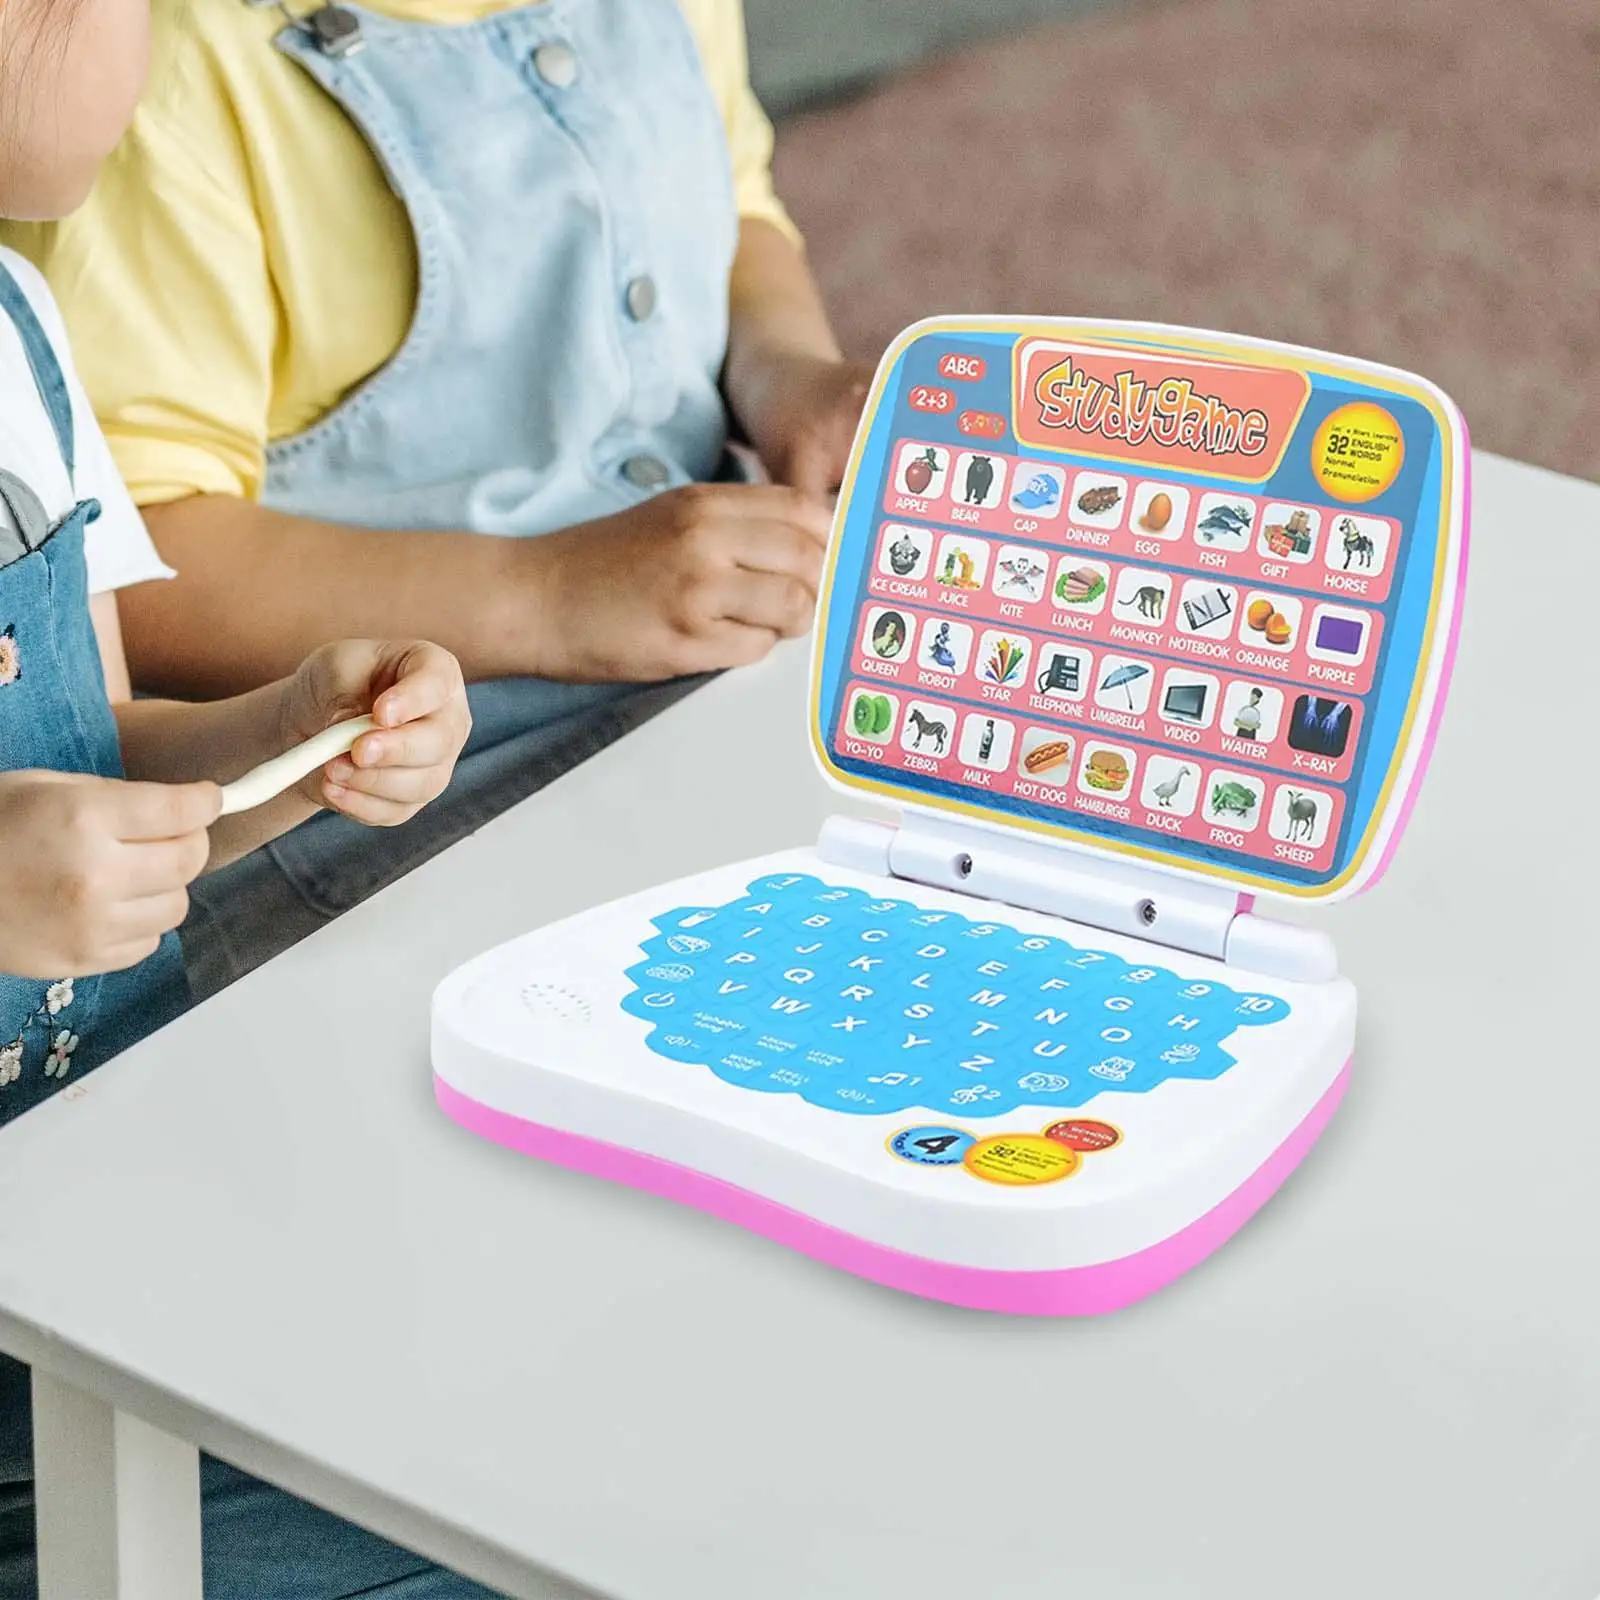 Multifunction Kids Laptop Toy,English Early Education Toy,Computer Child Interactive Learning Pad Tablet for Toddler Girls Boys